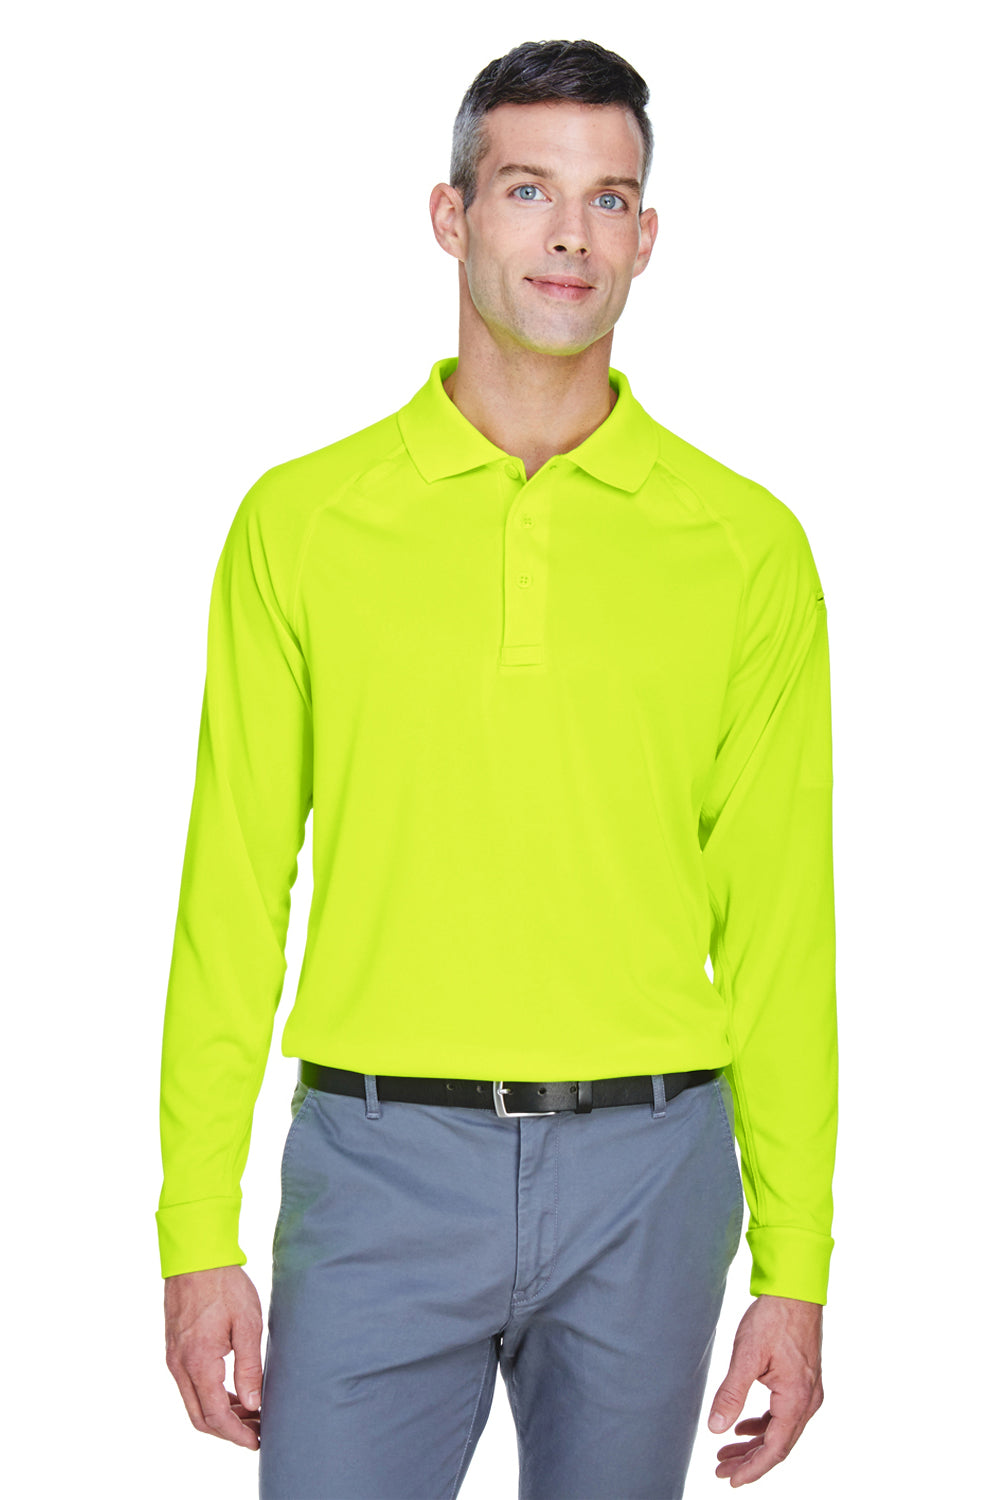 Harriton M211L Mens Advantage Tactical Moisture Wicking Long Sleeve Polo Shirt Safety Yellow Front